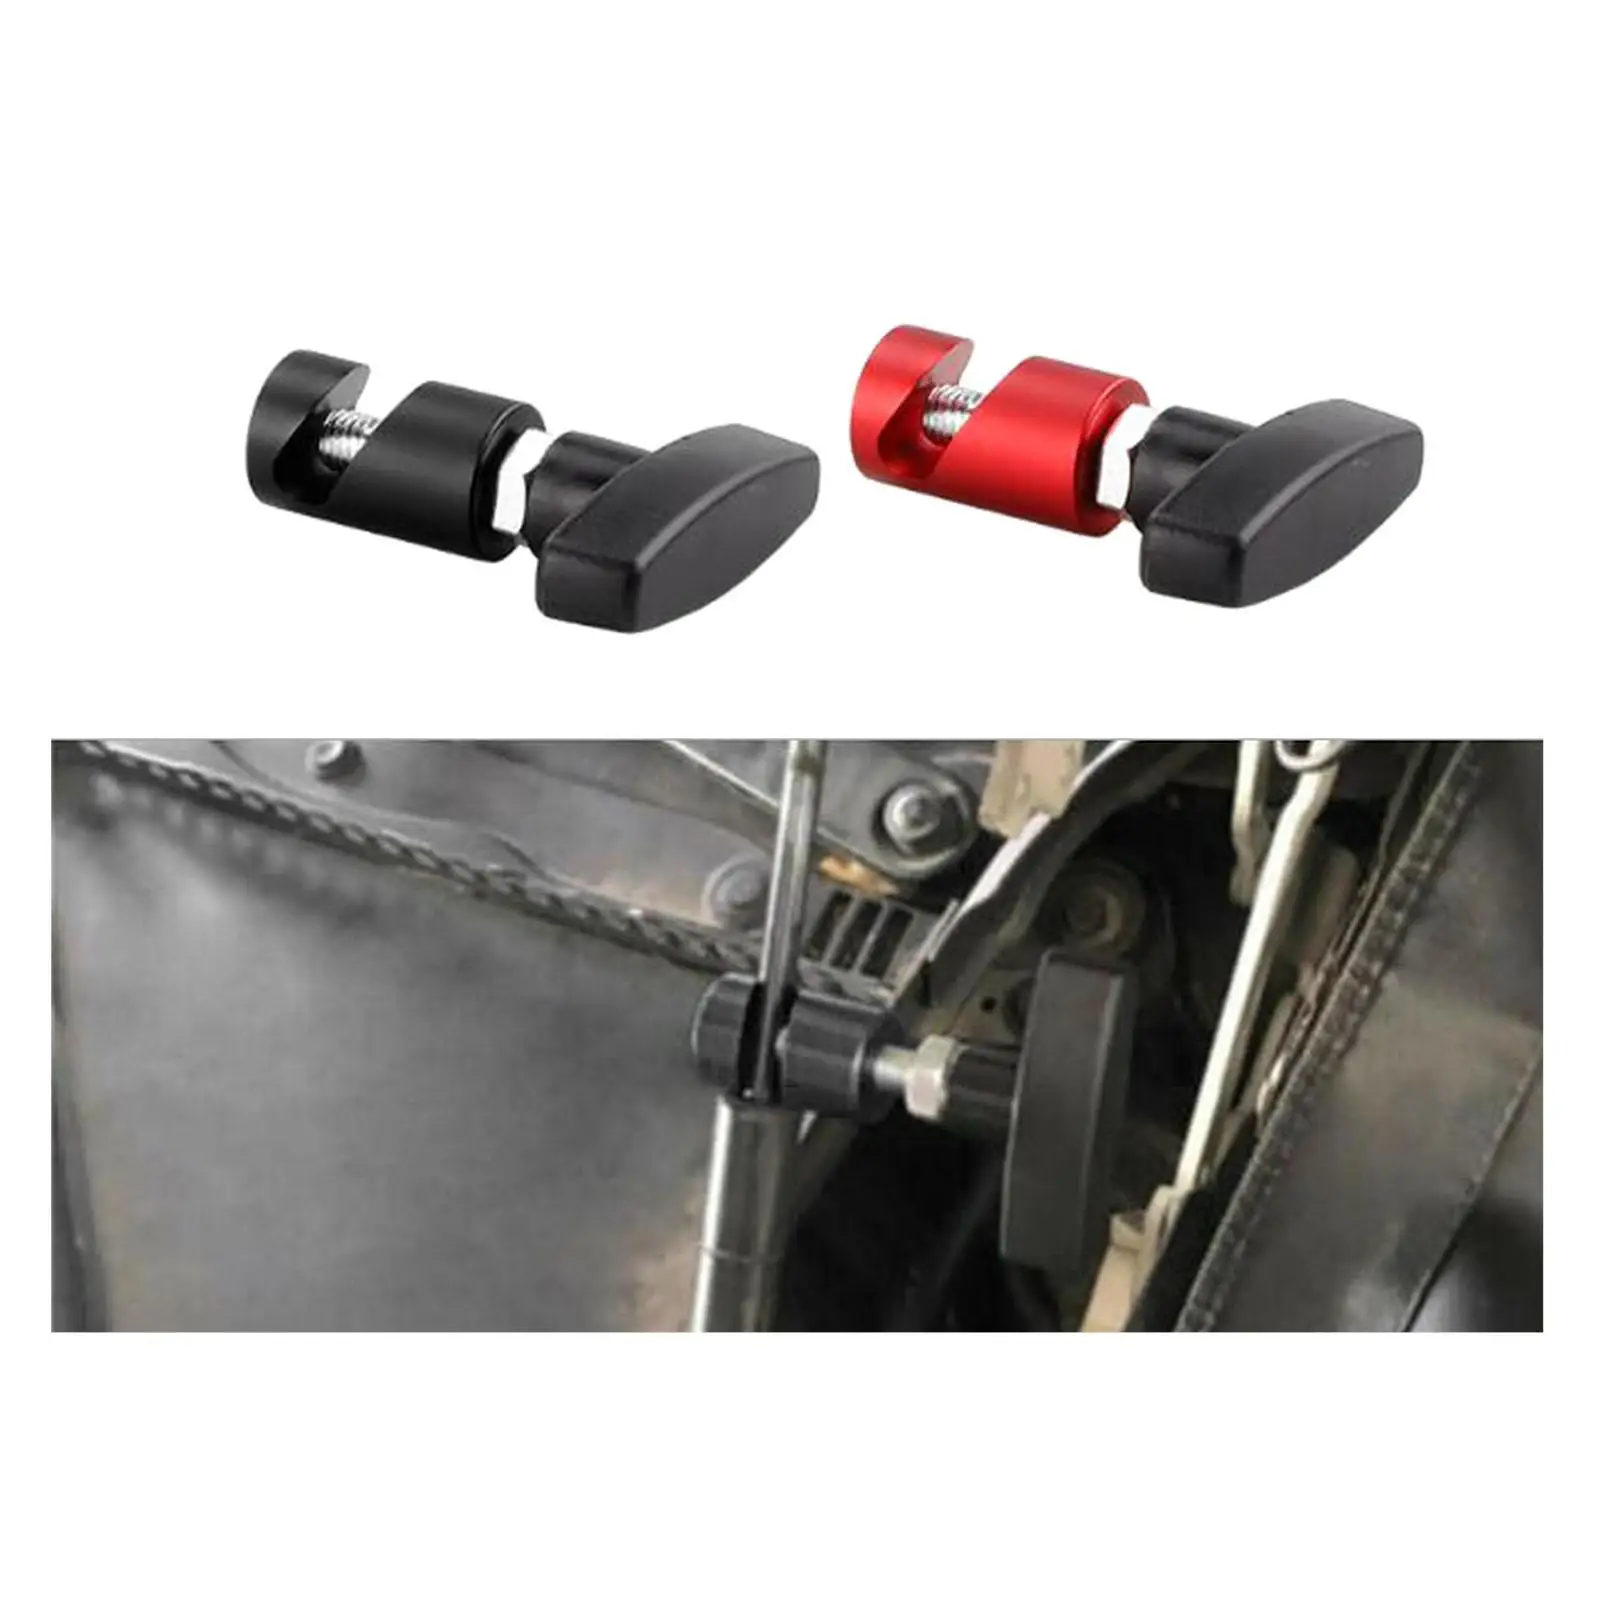 Durable Lift Support Clamp for Lifting Rod for Necessary Tool